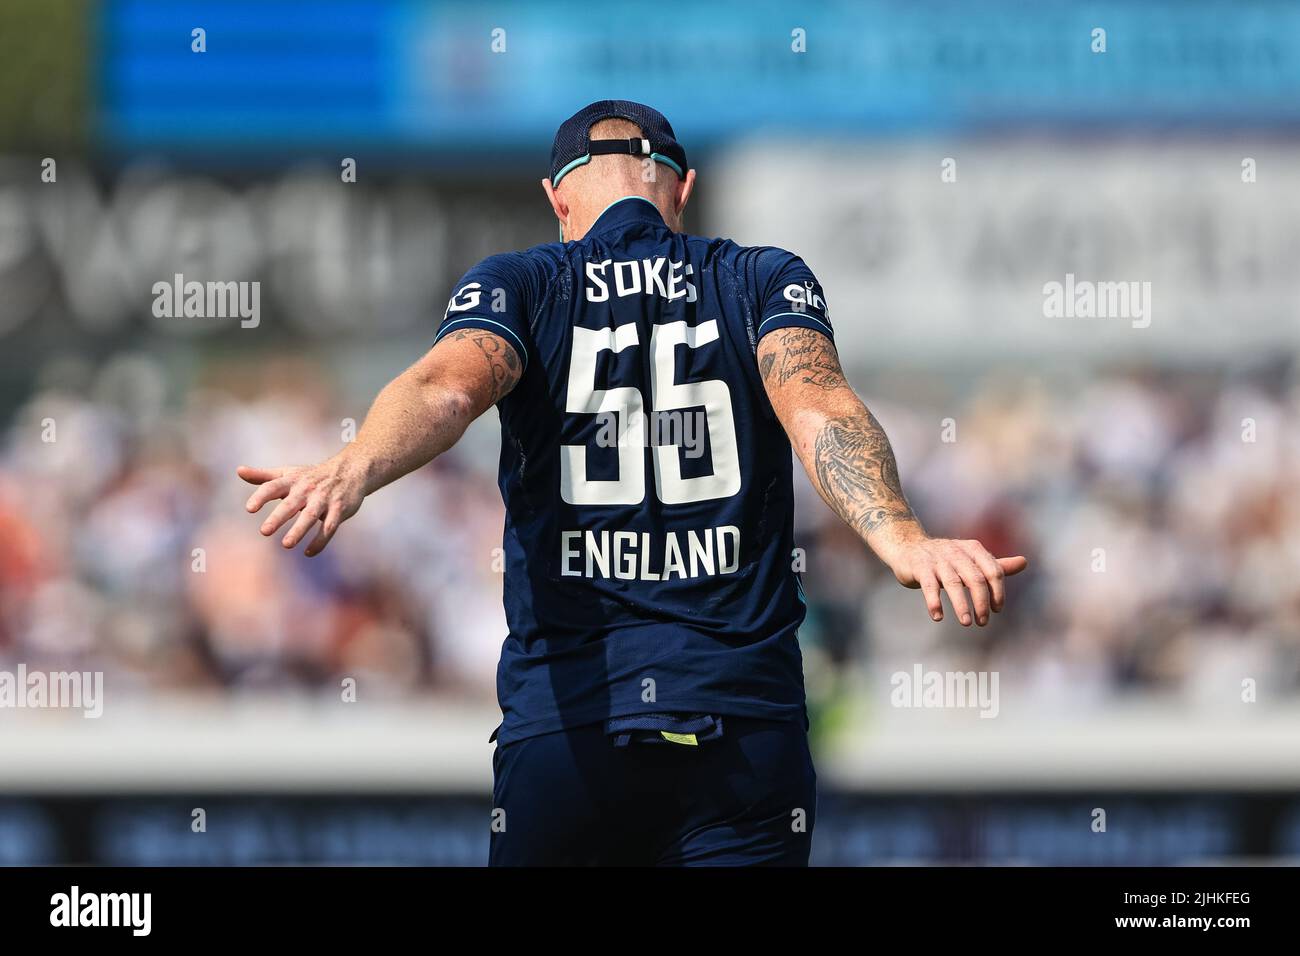 Ben Stokes of England stretching during the excessive heat during the game Stock Photo